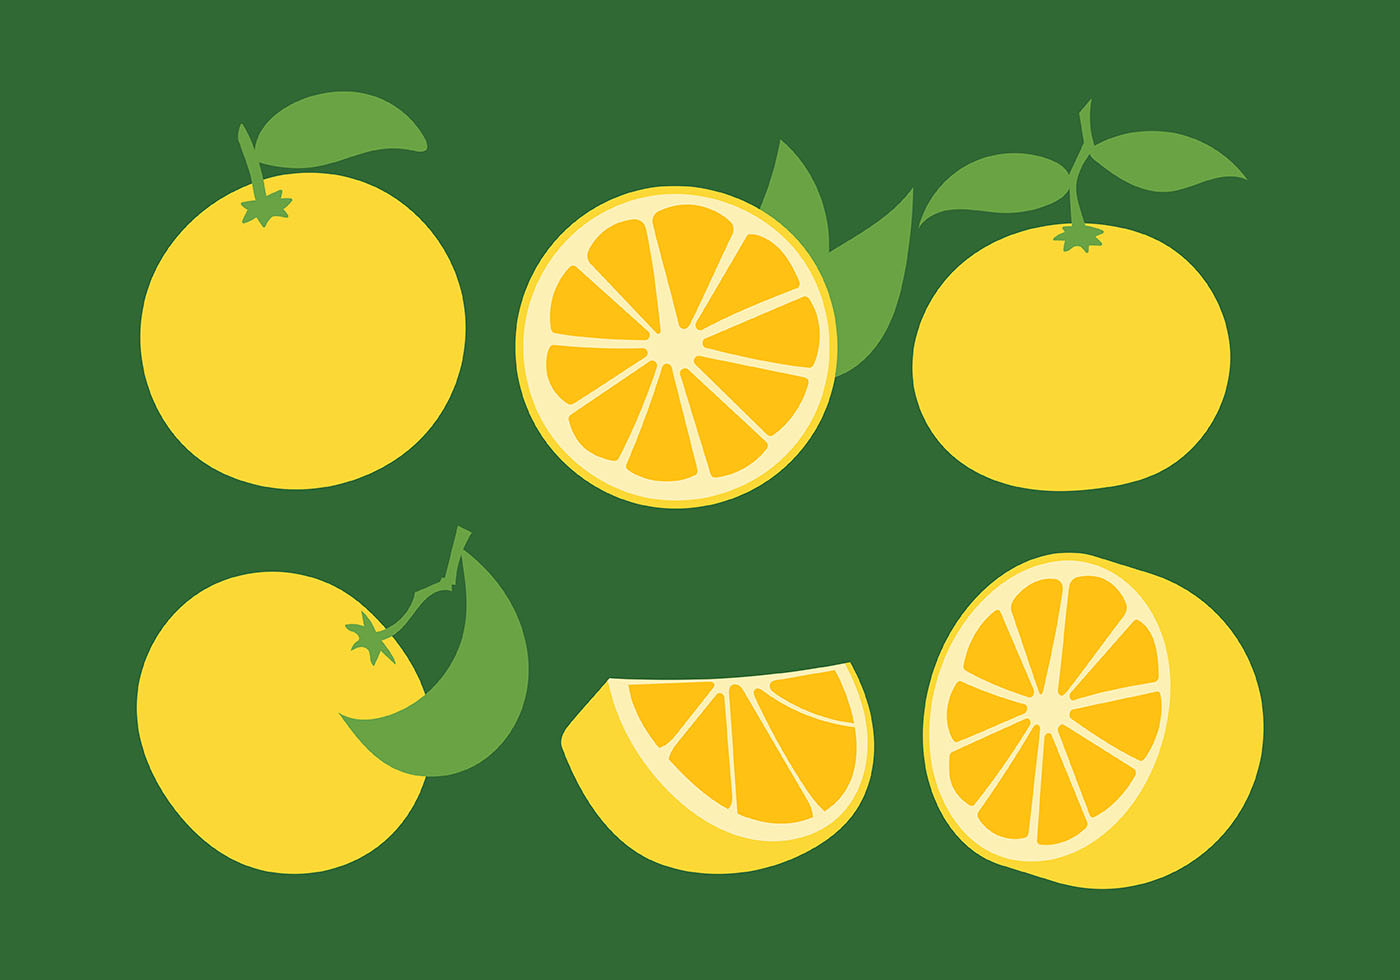 Clementine Vector Icons - Download Free Vectors, Clipart ...